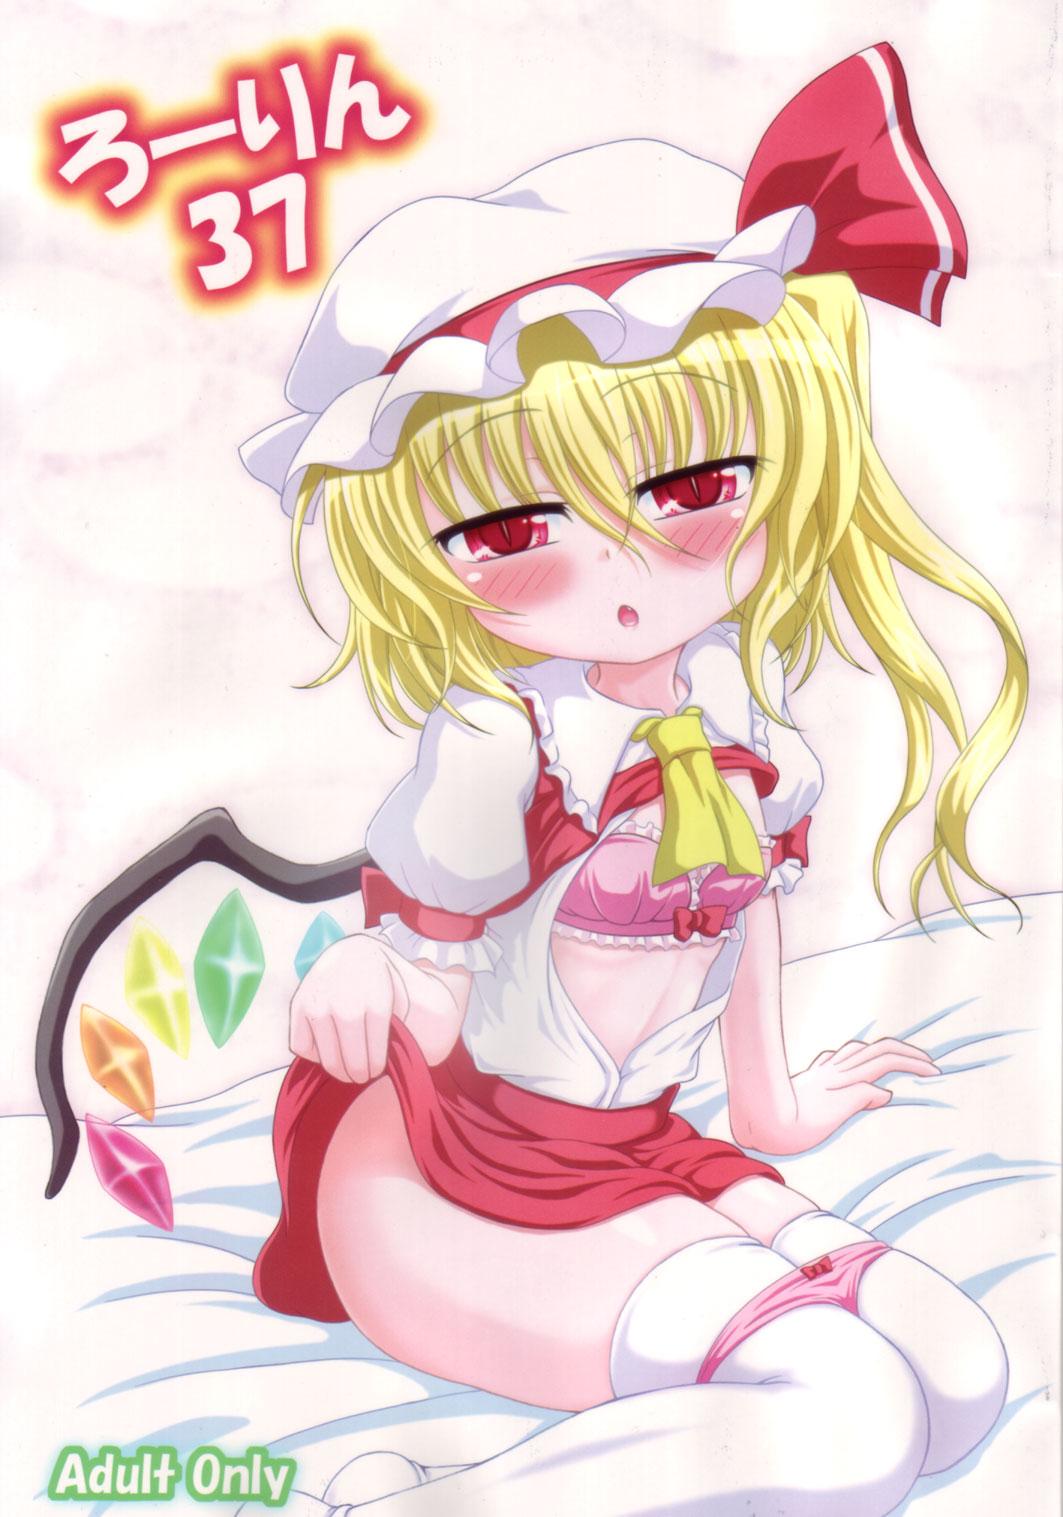 English Rollin 37 - Touhou project Lover - Picture 1